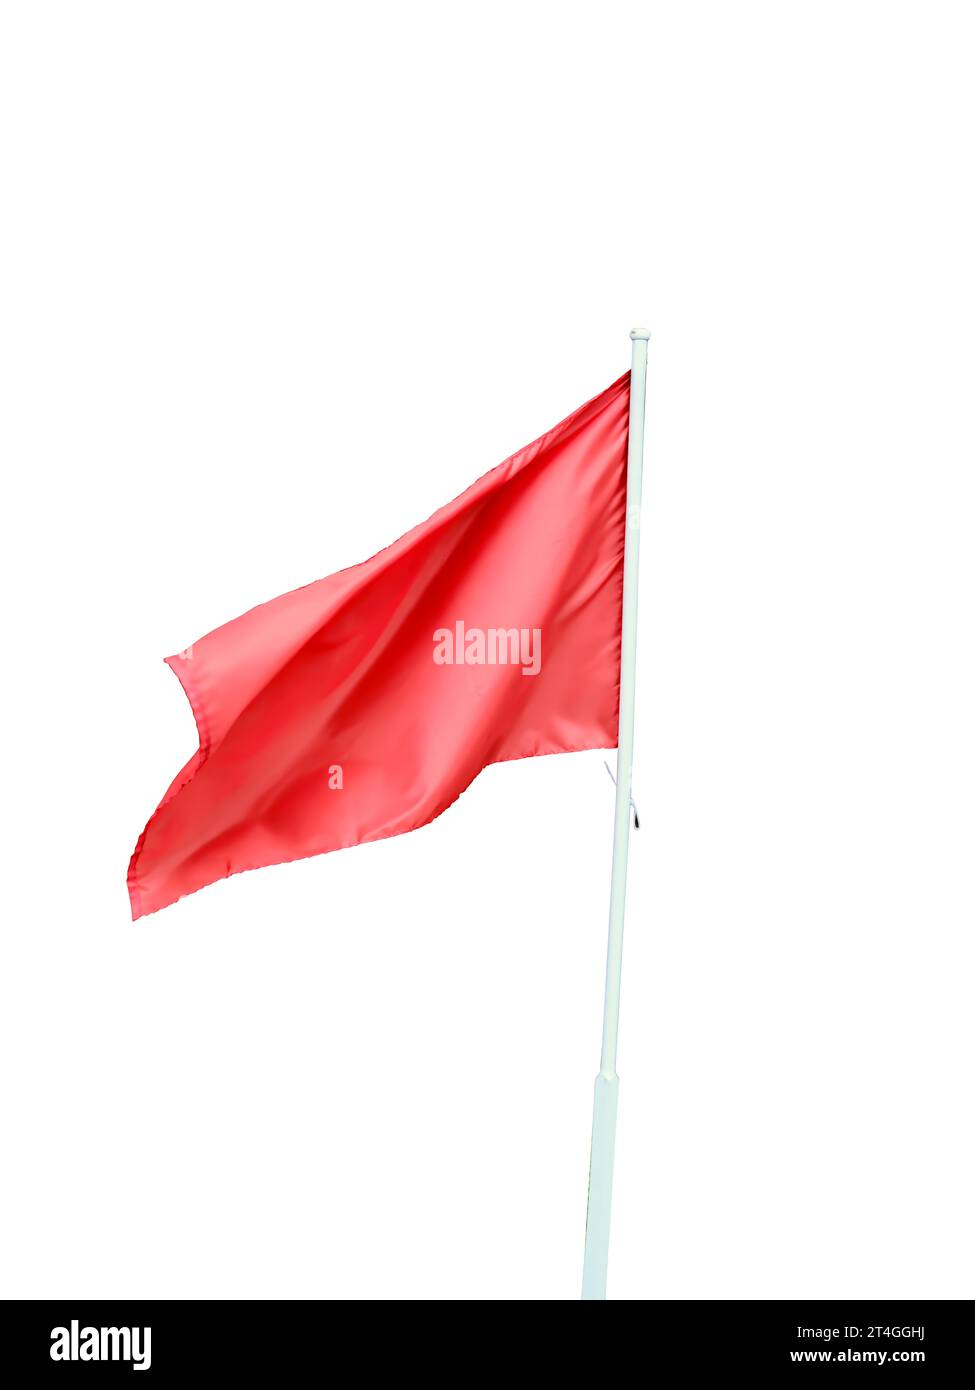 Red Blank Flag Template Isolated on a White Background Stock Photo